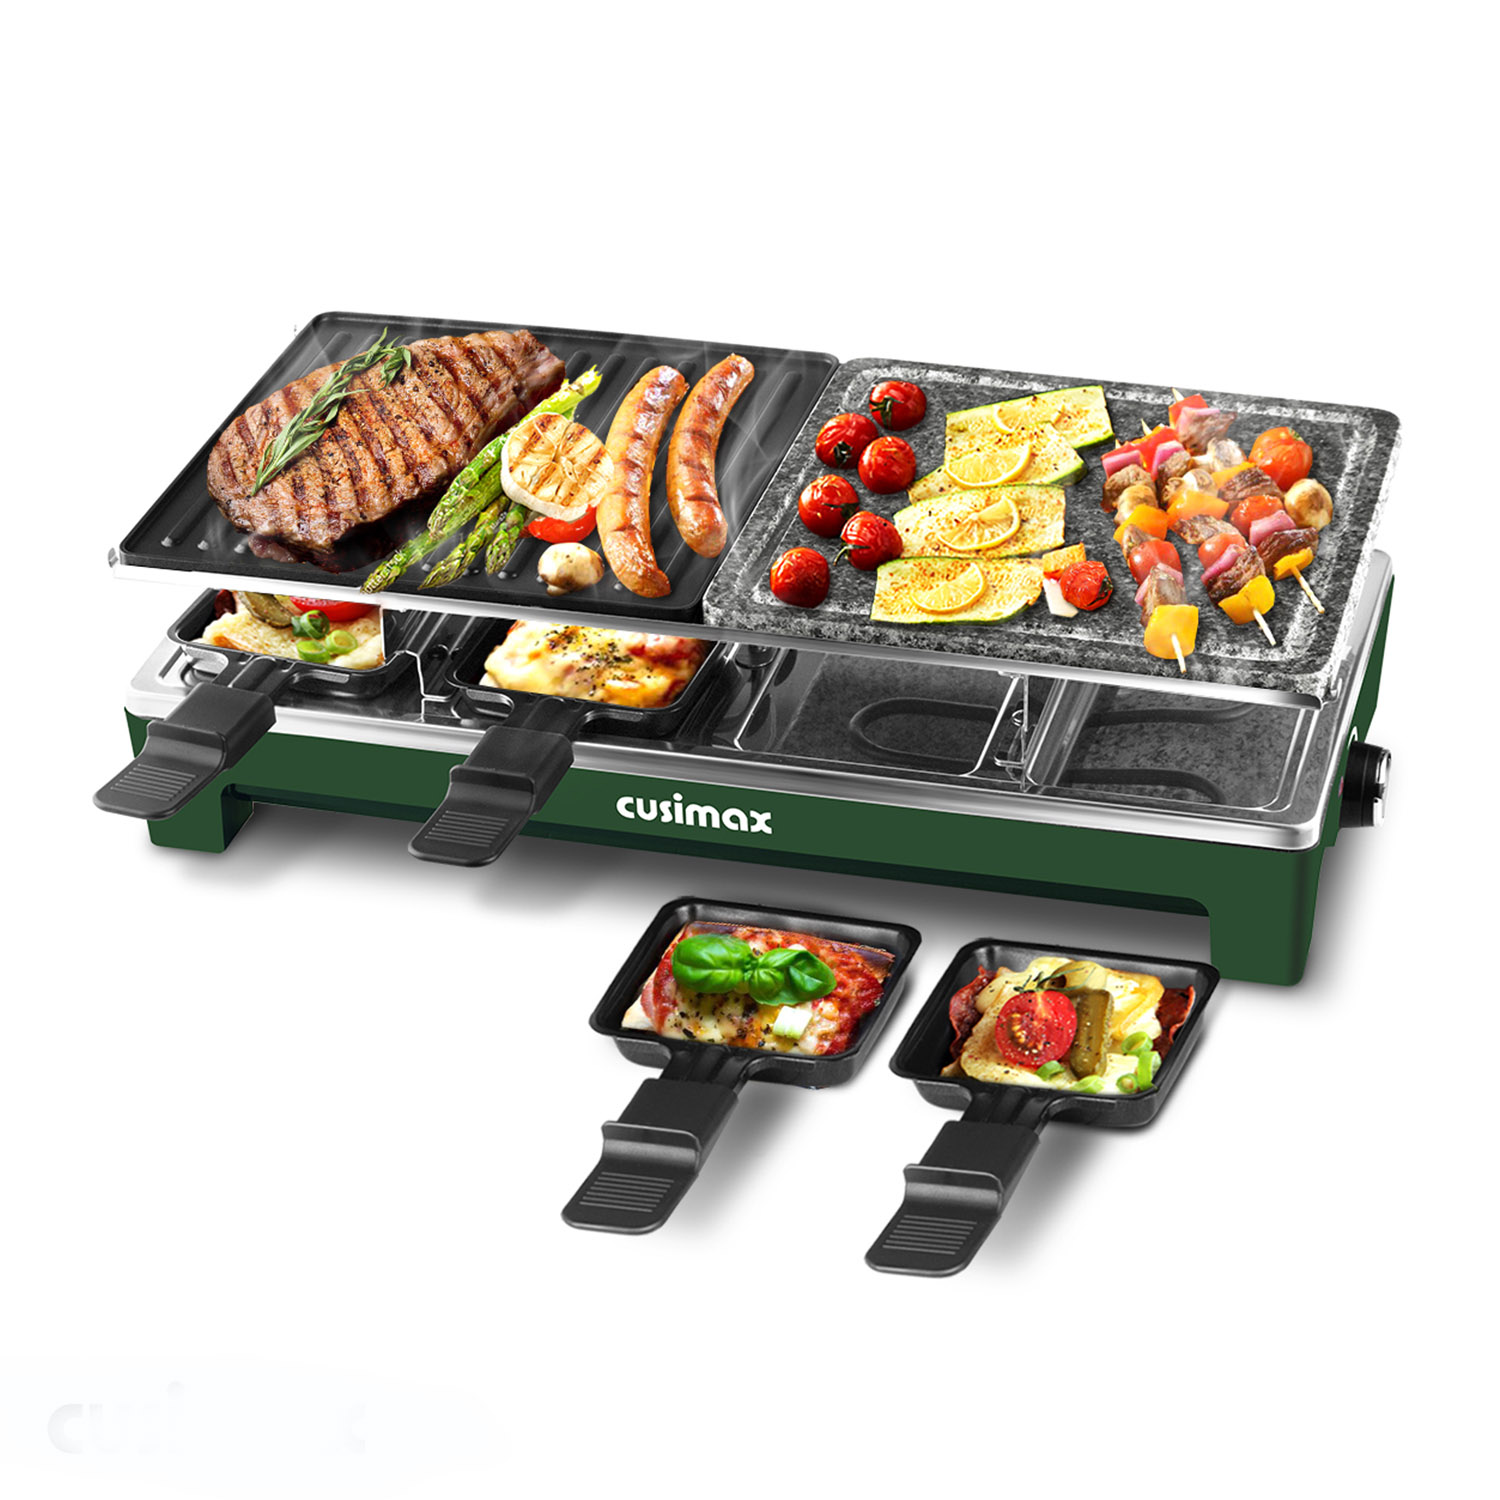 Gourmettmaxx, A Ware, Raclette Grill for 2 people, Goods for